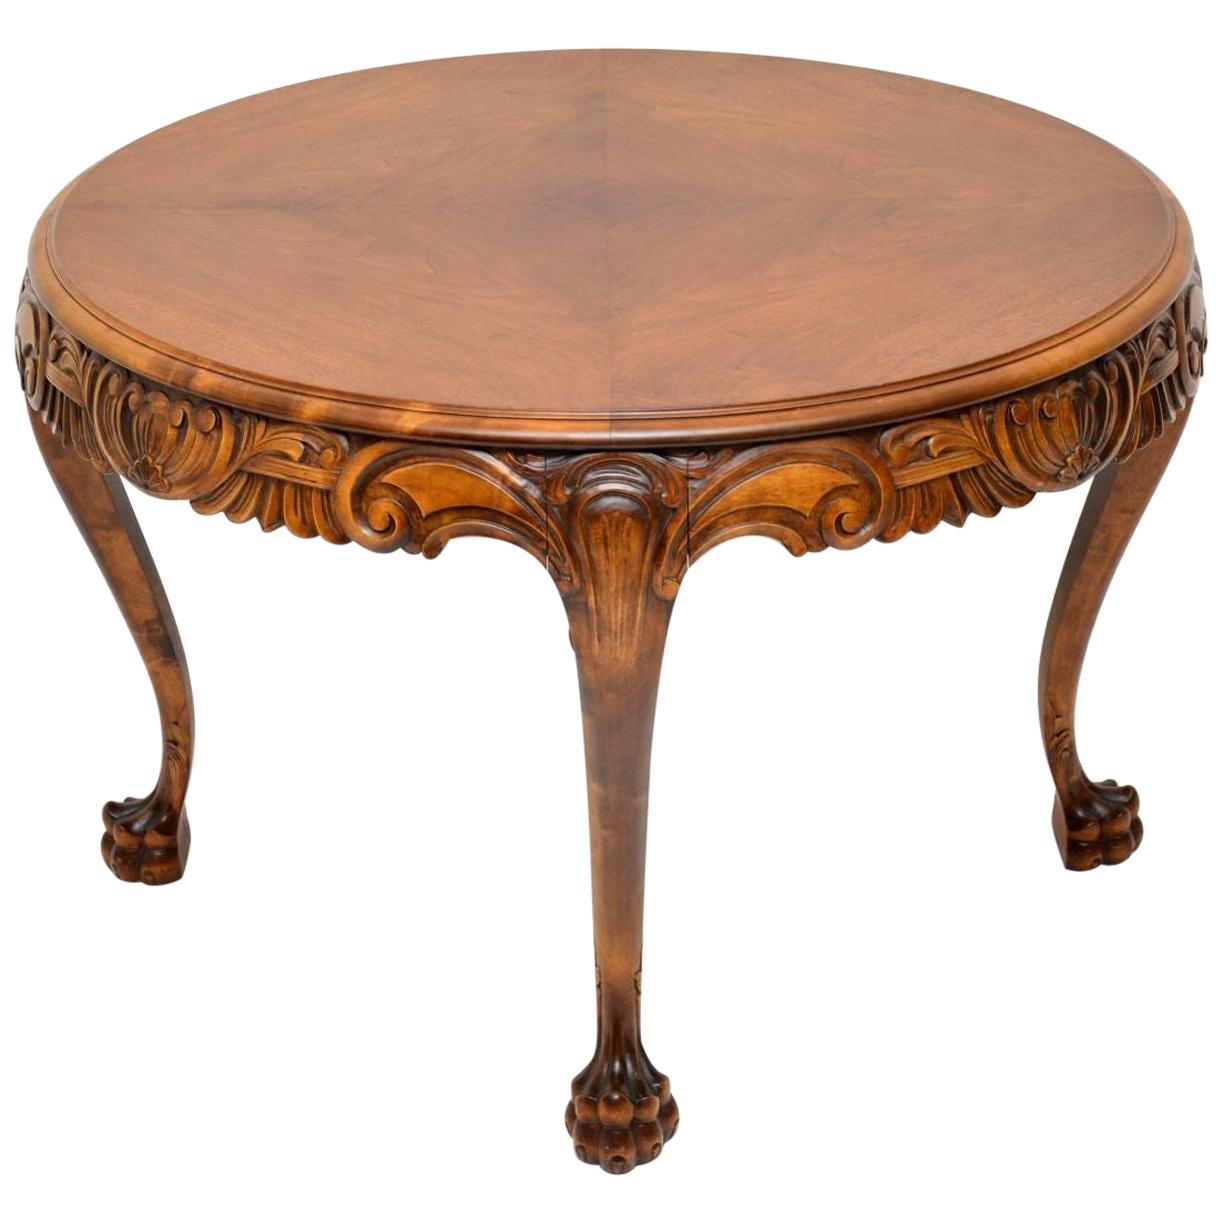 Good quality antique Swedish circular coffee table in satin birch and with some beautiful carvings around the top edge and on the legs, which have claw feet. It’s in excellent condition and dates from circa 1930s period.

Measures: Width 36